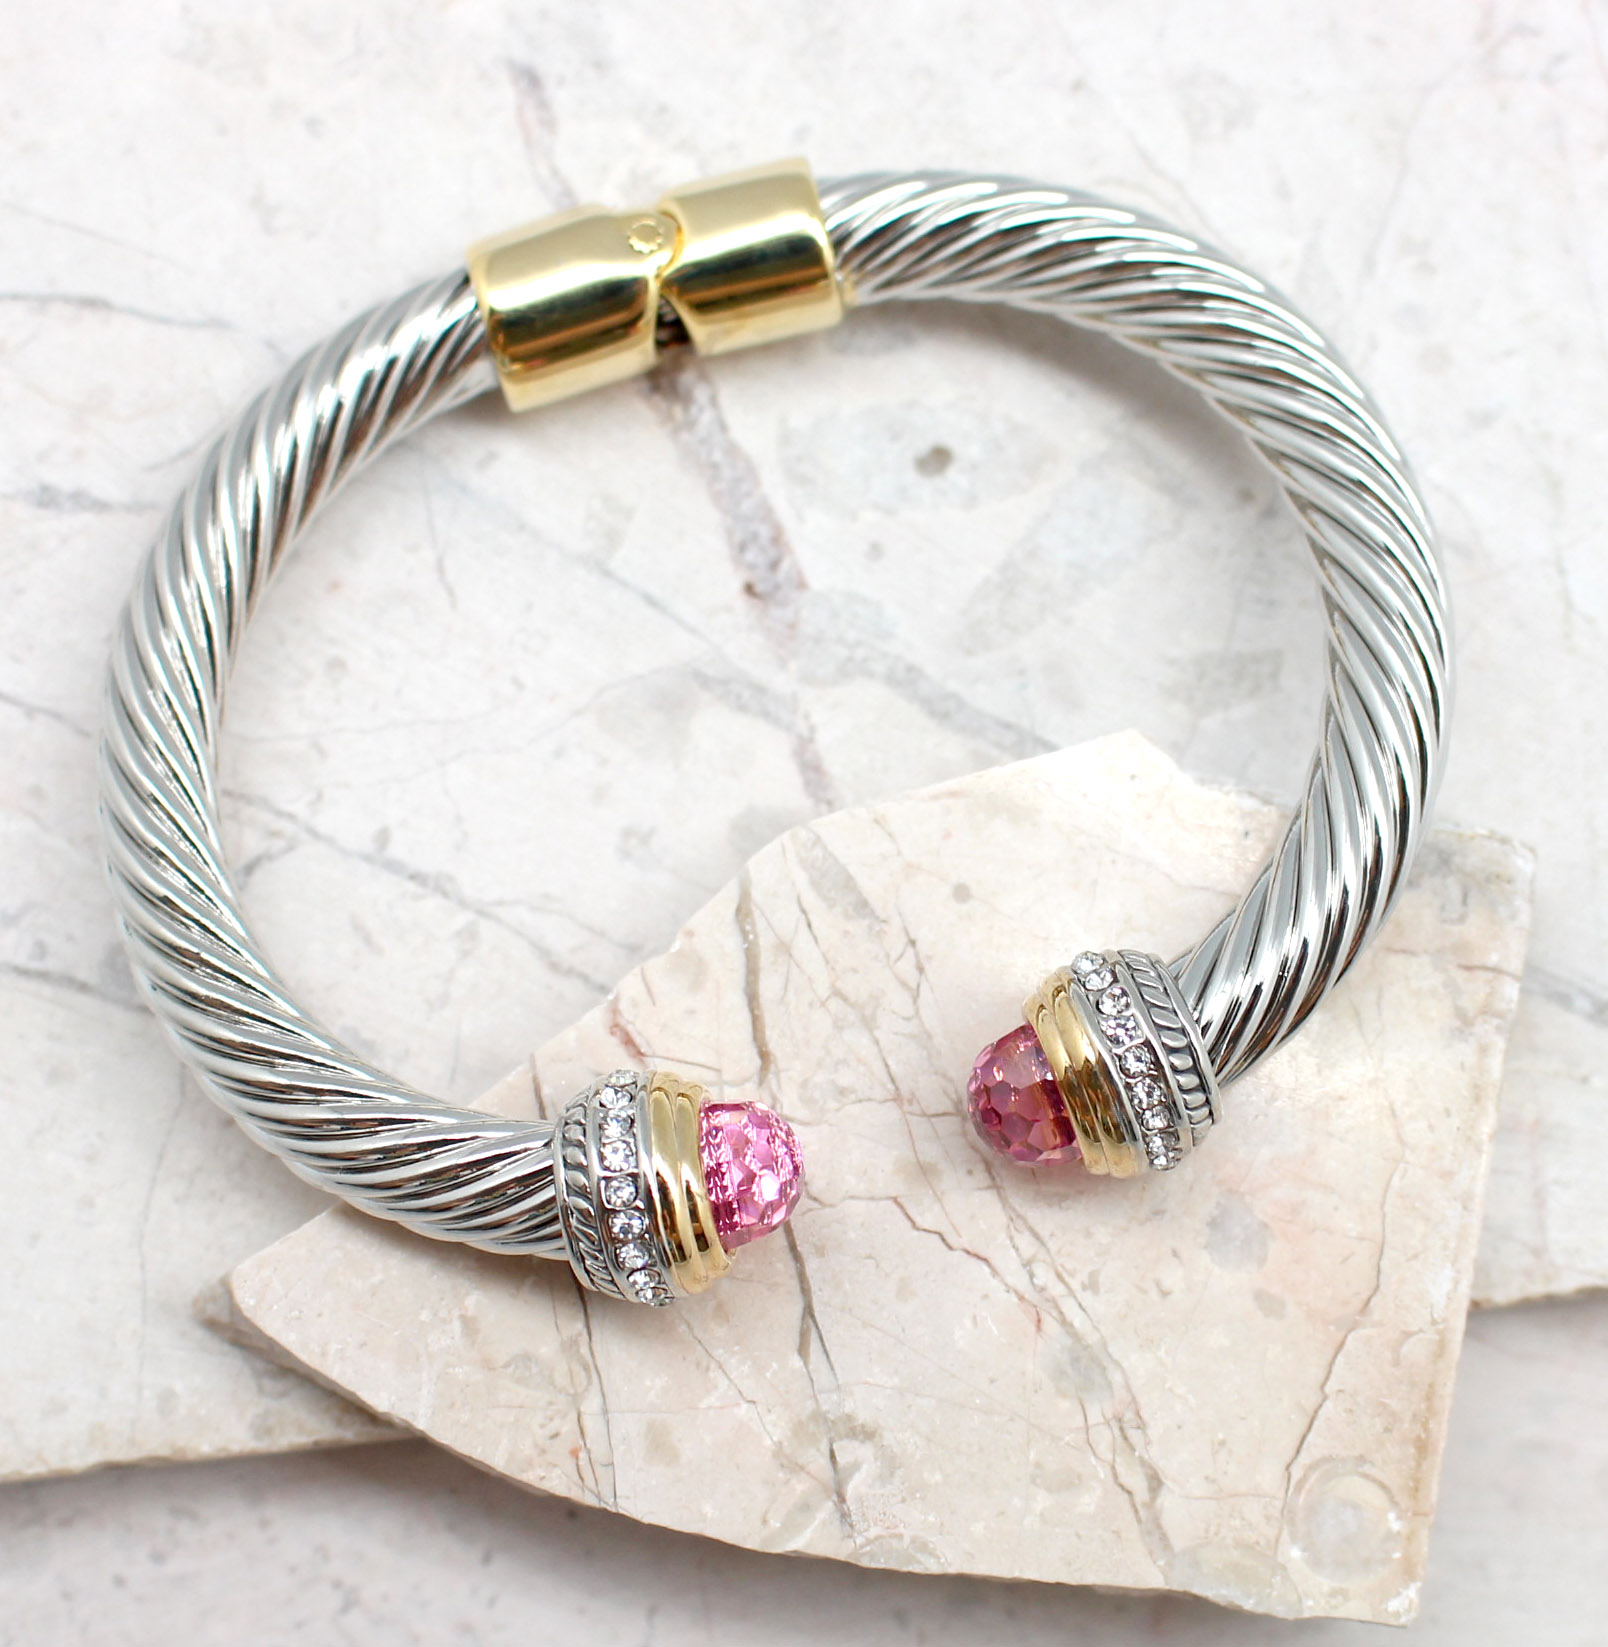 The Forever Cuff Bracelet